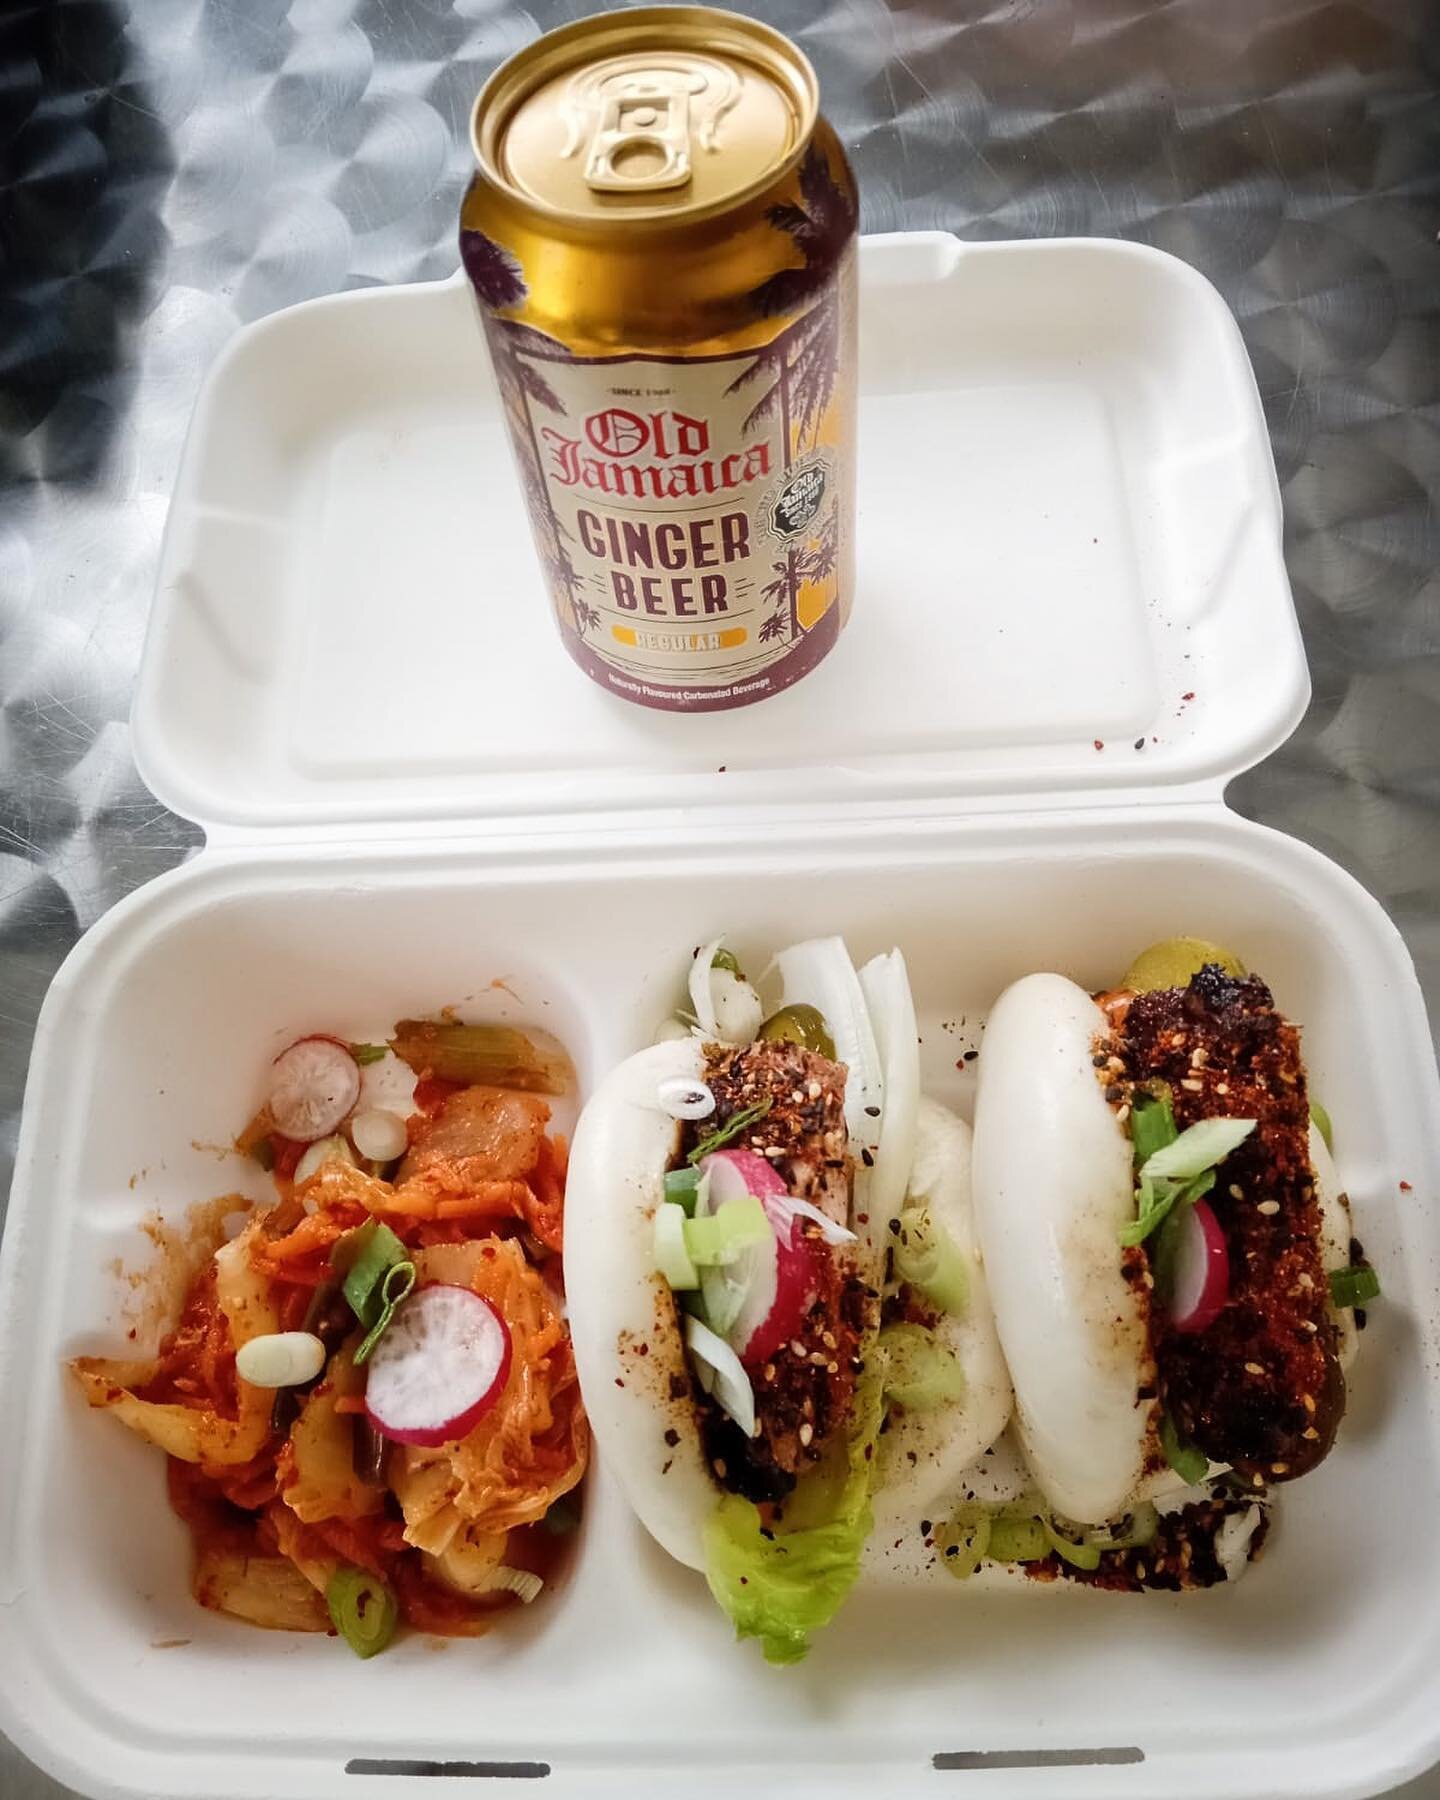 It's a busy day today, and for NHS staff joining us at Biomed, we got you! Grab yourself a cheeky discount with the #GivingBack lunch deal. Here's what you get for just &pound;9:⁠
⁠
🫓 2 Bao Buns⁠
🍵 Kimchi ⁠
🥤a drink⁠
⁠
To claim, just add the deal 